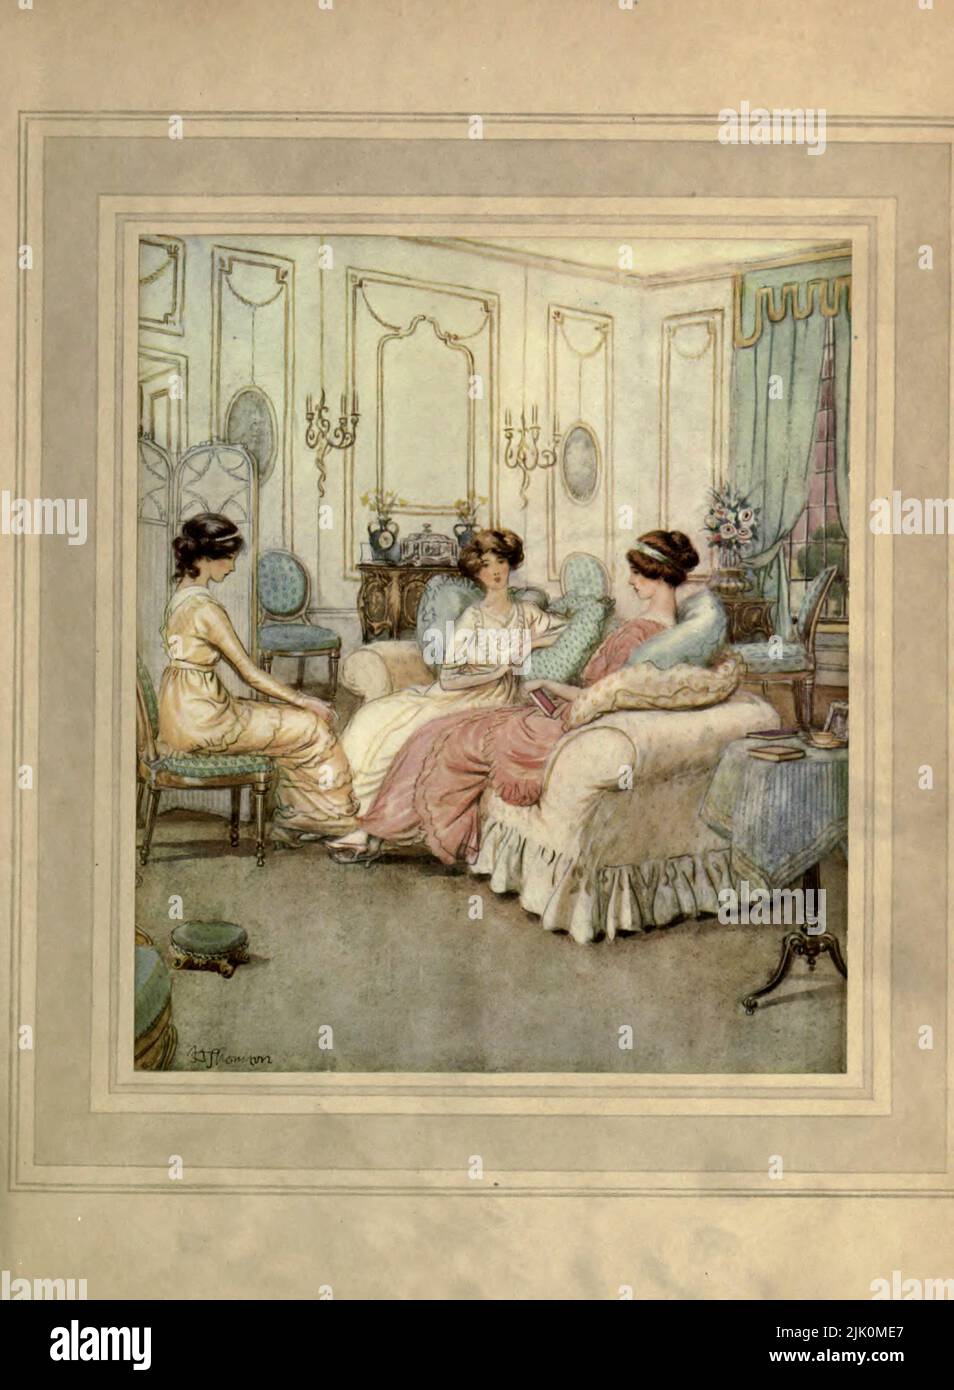 The girls are alone with their tragic thoughts (Act I at Loam House, Mayfair) The Admirable Crichton is a comic stage play written in 1902 by J. M. Barrie. Illustrated by Hugh Thomson RI (1 June 1860 – 7 May 1920) was an Irish Illustrator born at Coleraine near Derry. He is best known for his pen-and-ink illustrations of works by authors such as Jane Austen, Charles Dickens, and J. M. Barrie. Stock Photo